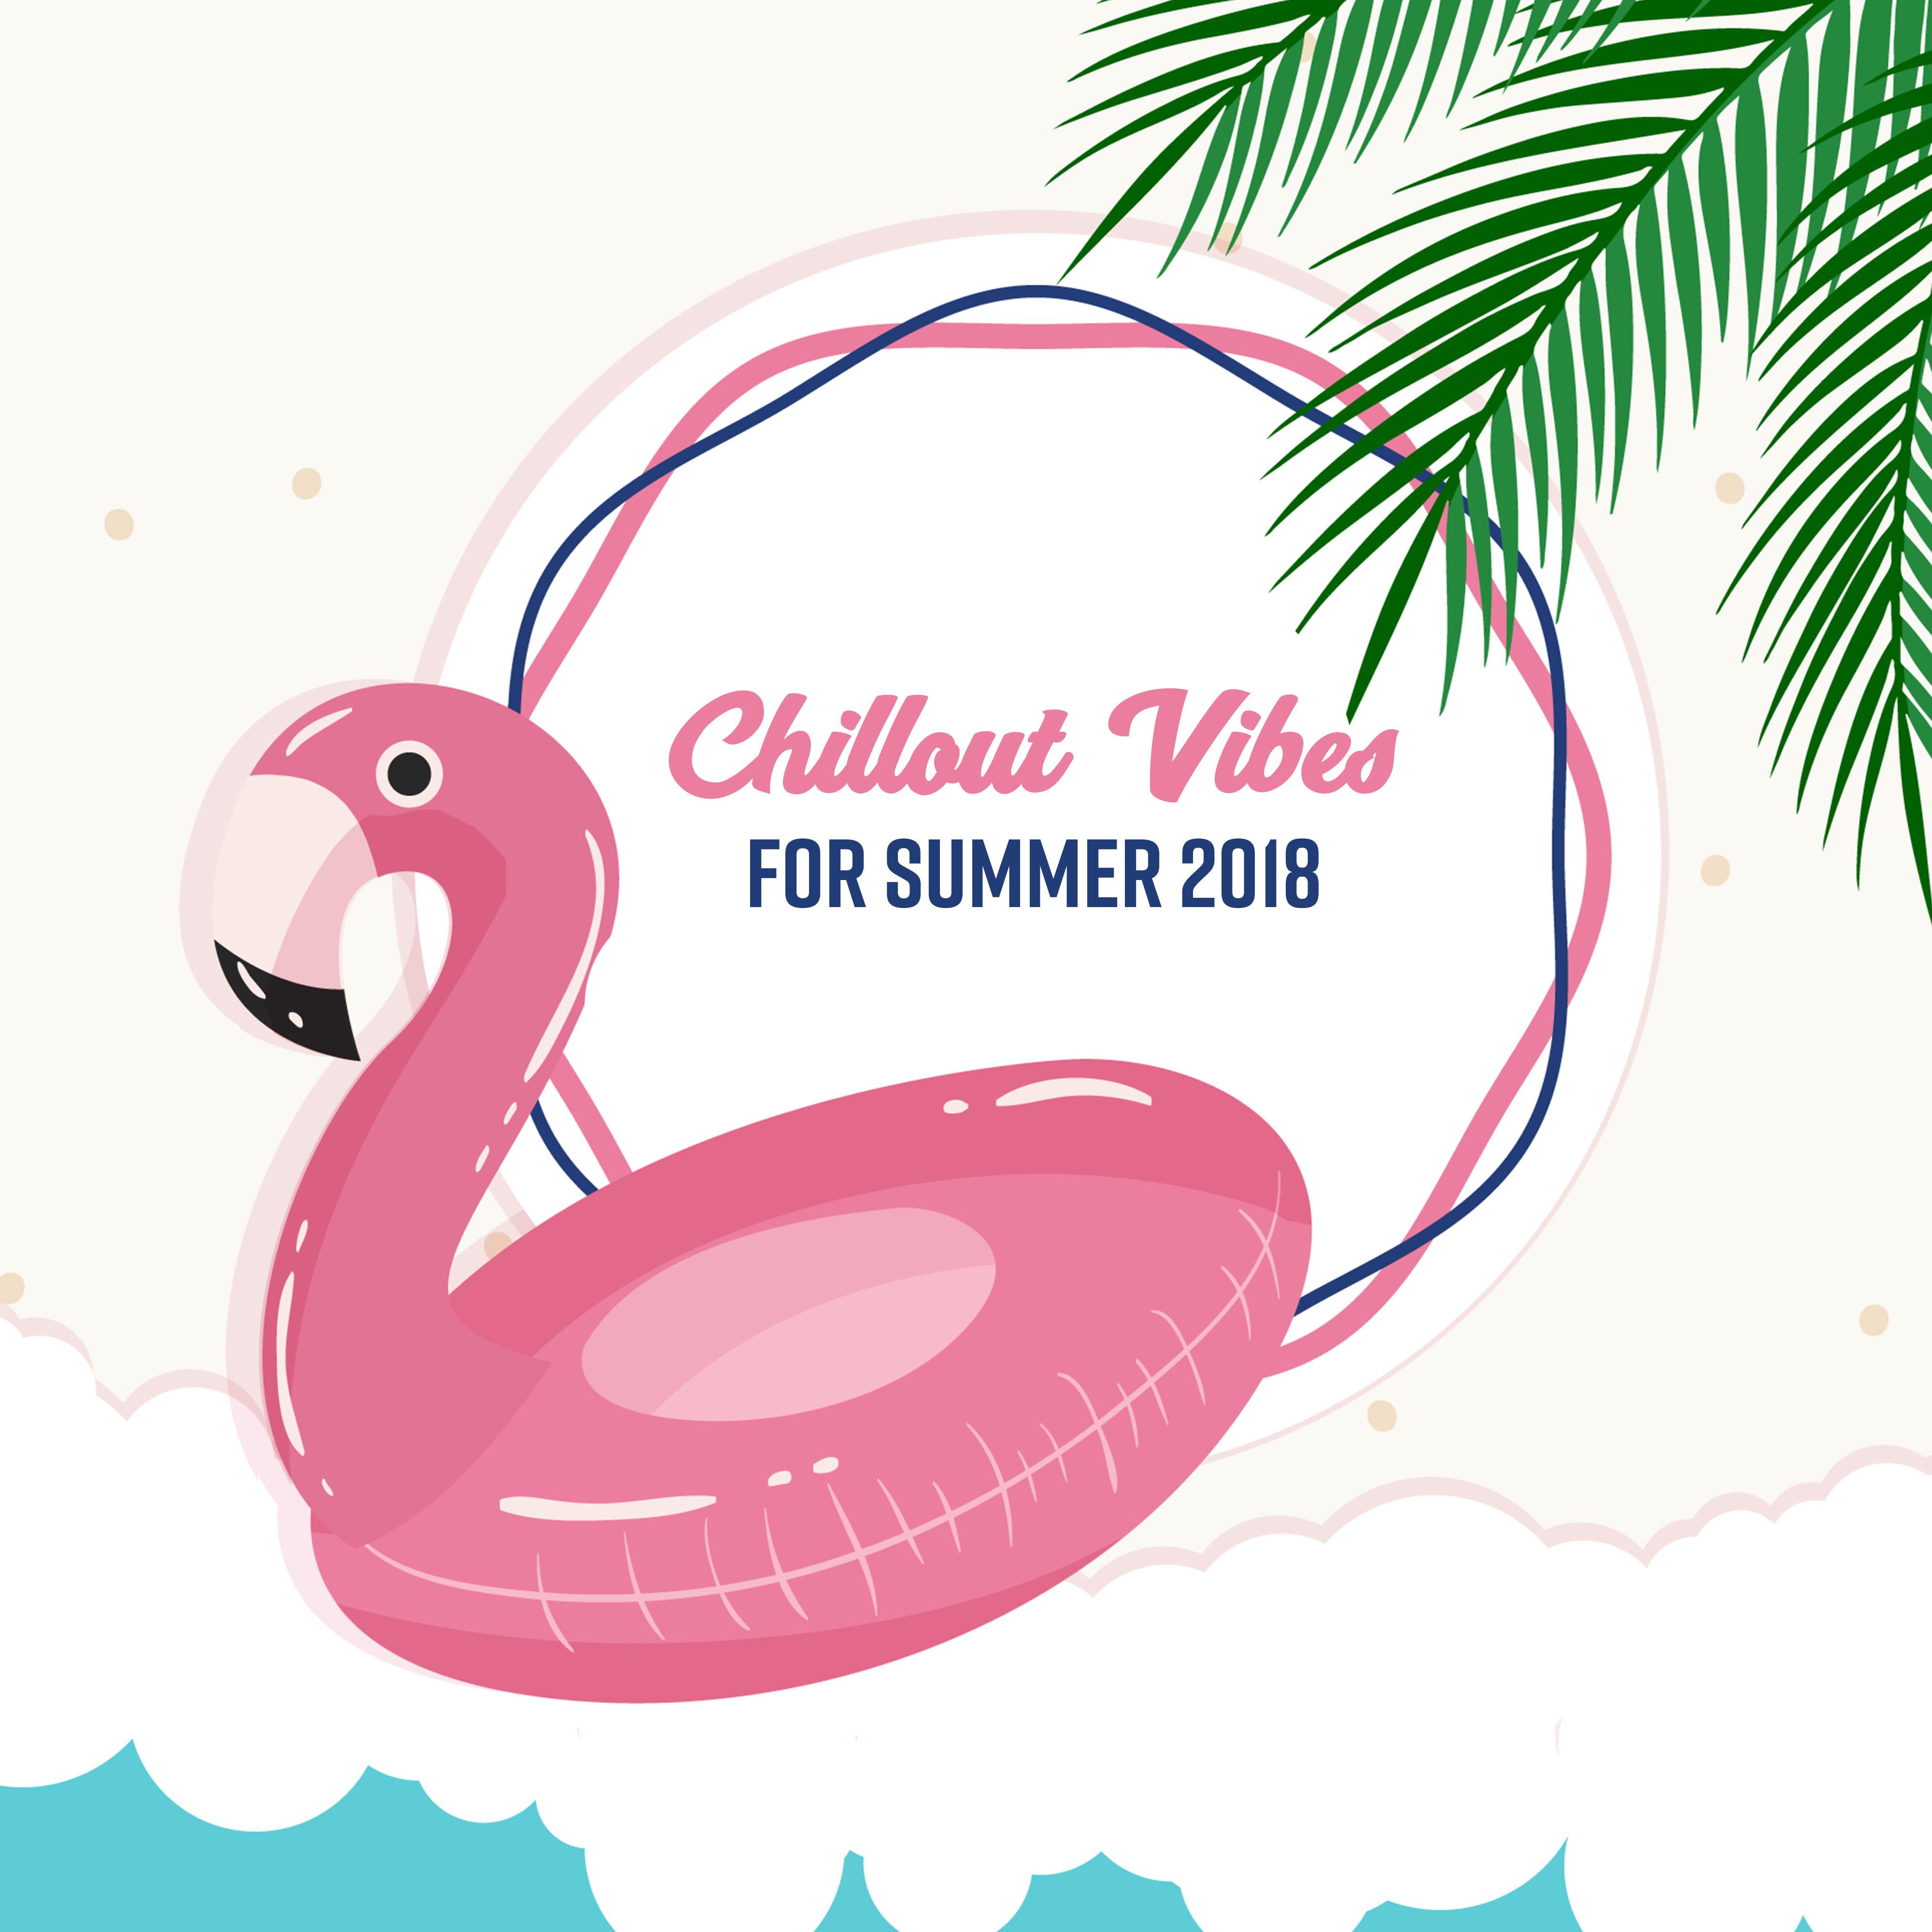 Chillout Vibes for Summer 2018